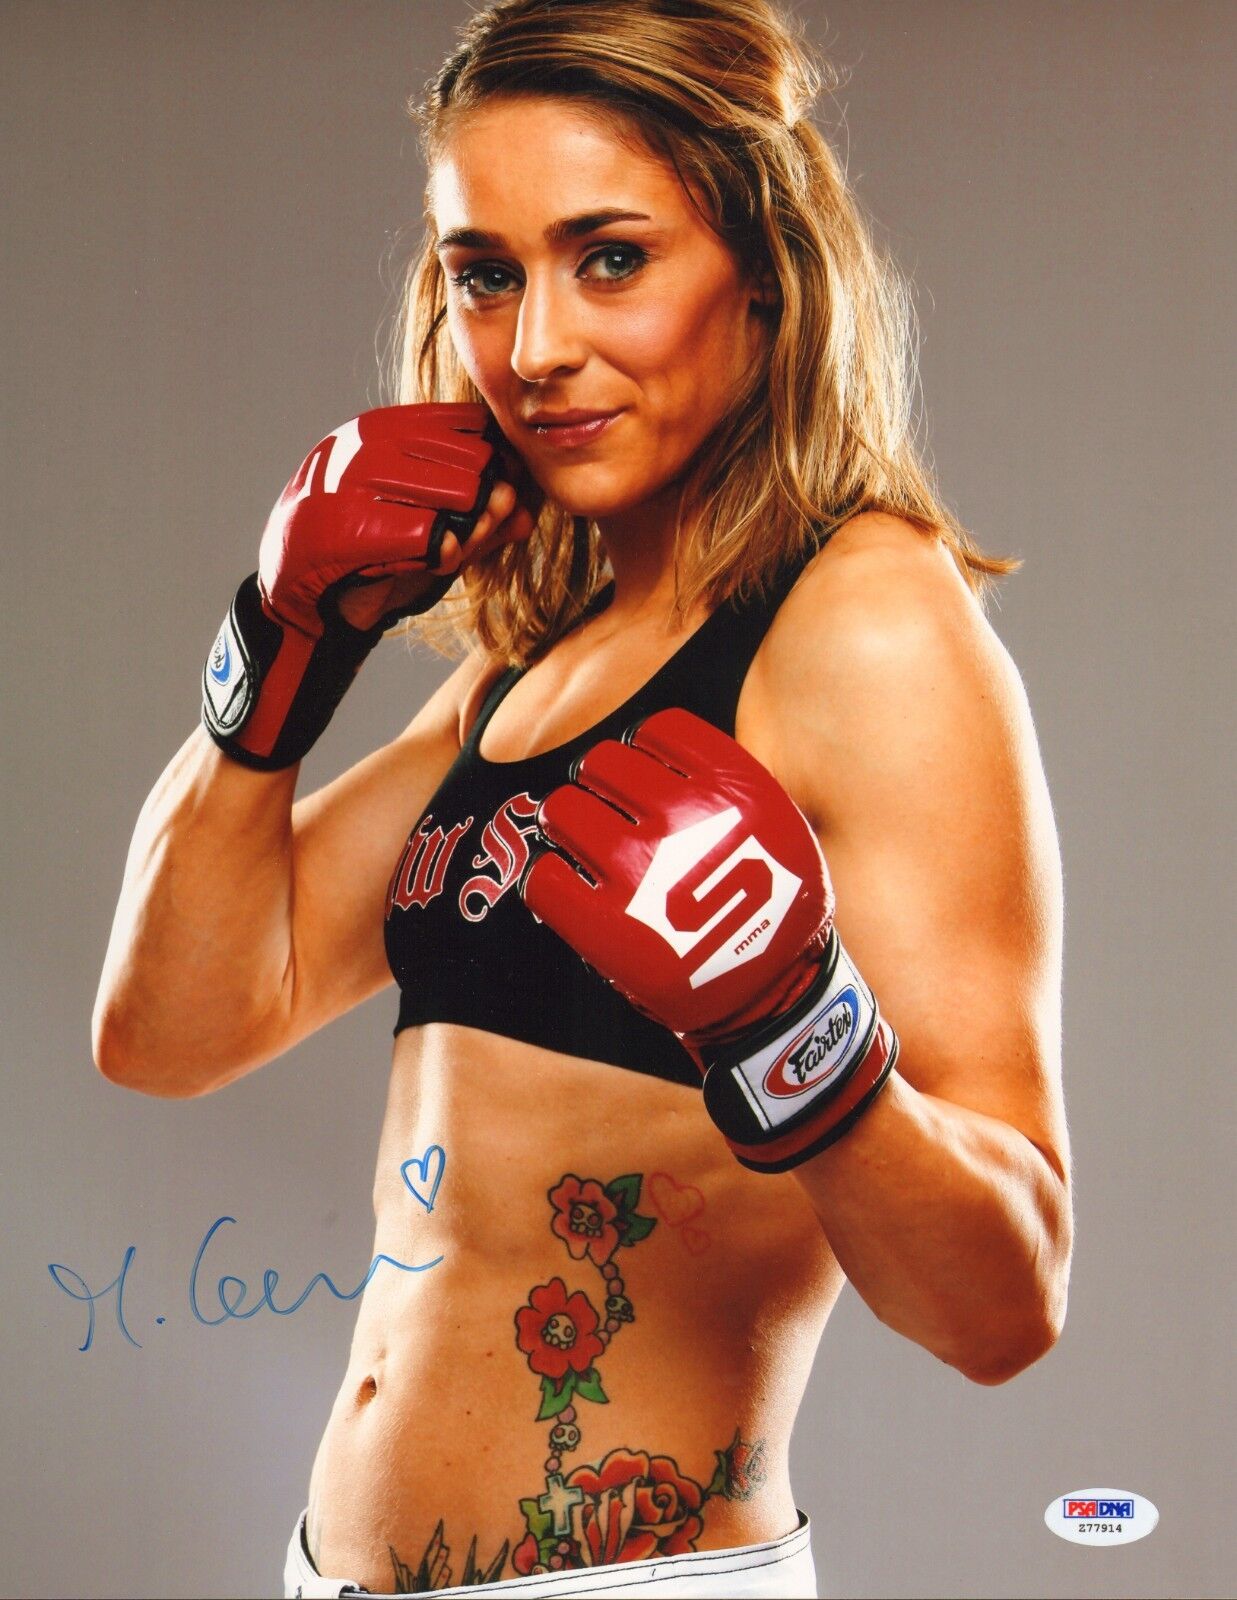 Marloes Coenen Signed 11x14 Photo Poster painting PSA/DNA COA Bellator StrikeForce UFC Invicta 3